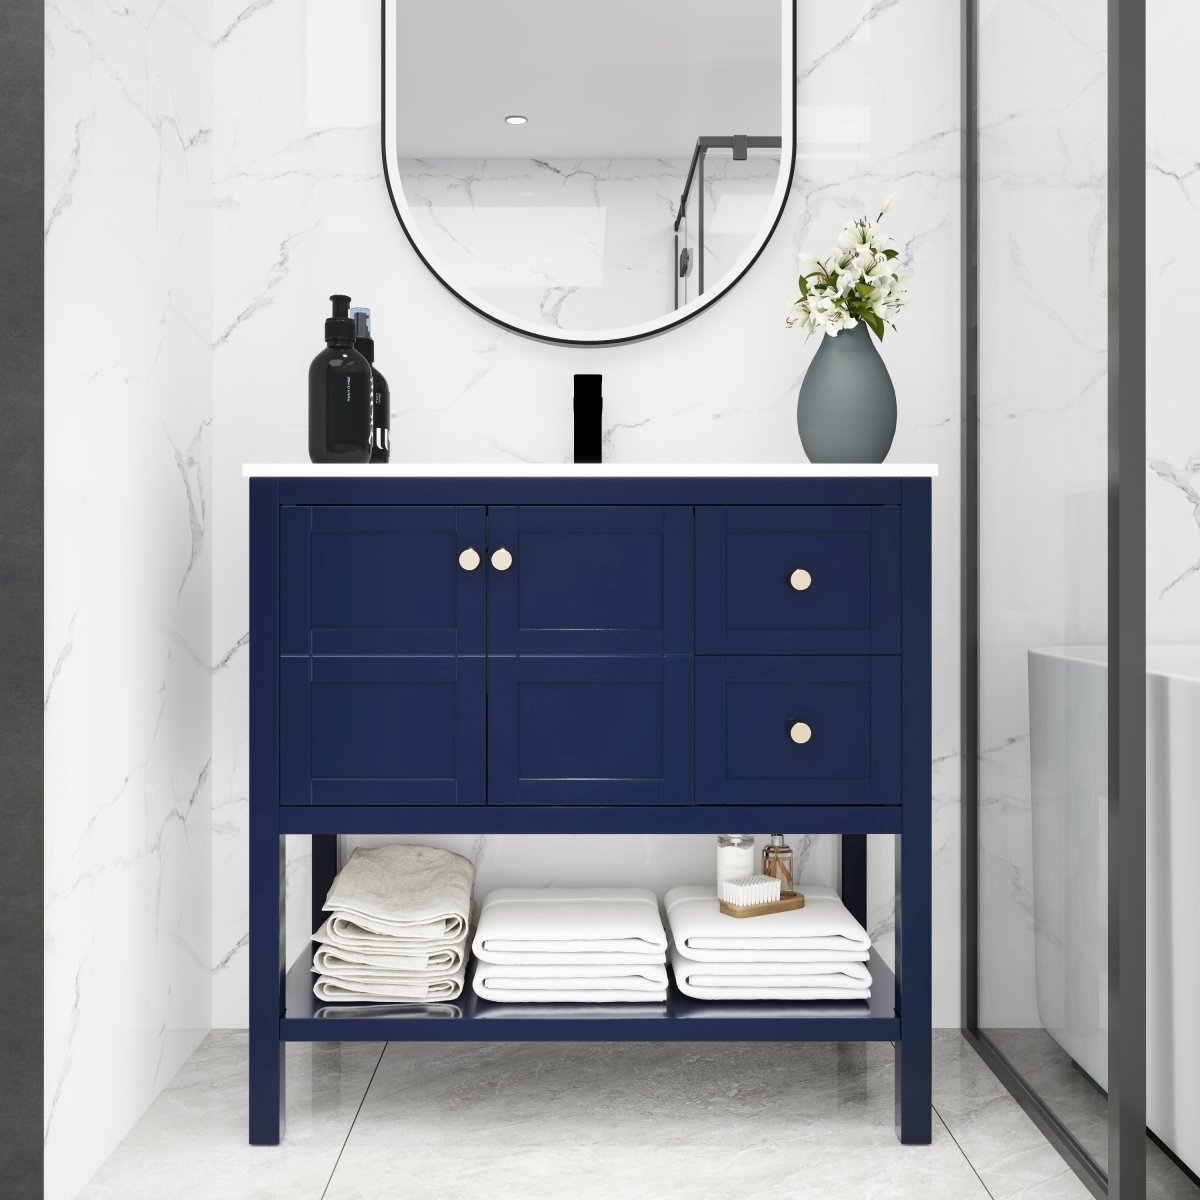 ExBrite 36x18 Bathroom Vanity With Soft Close Drawers And Gel Basin Blue